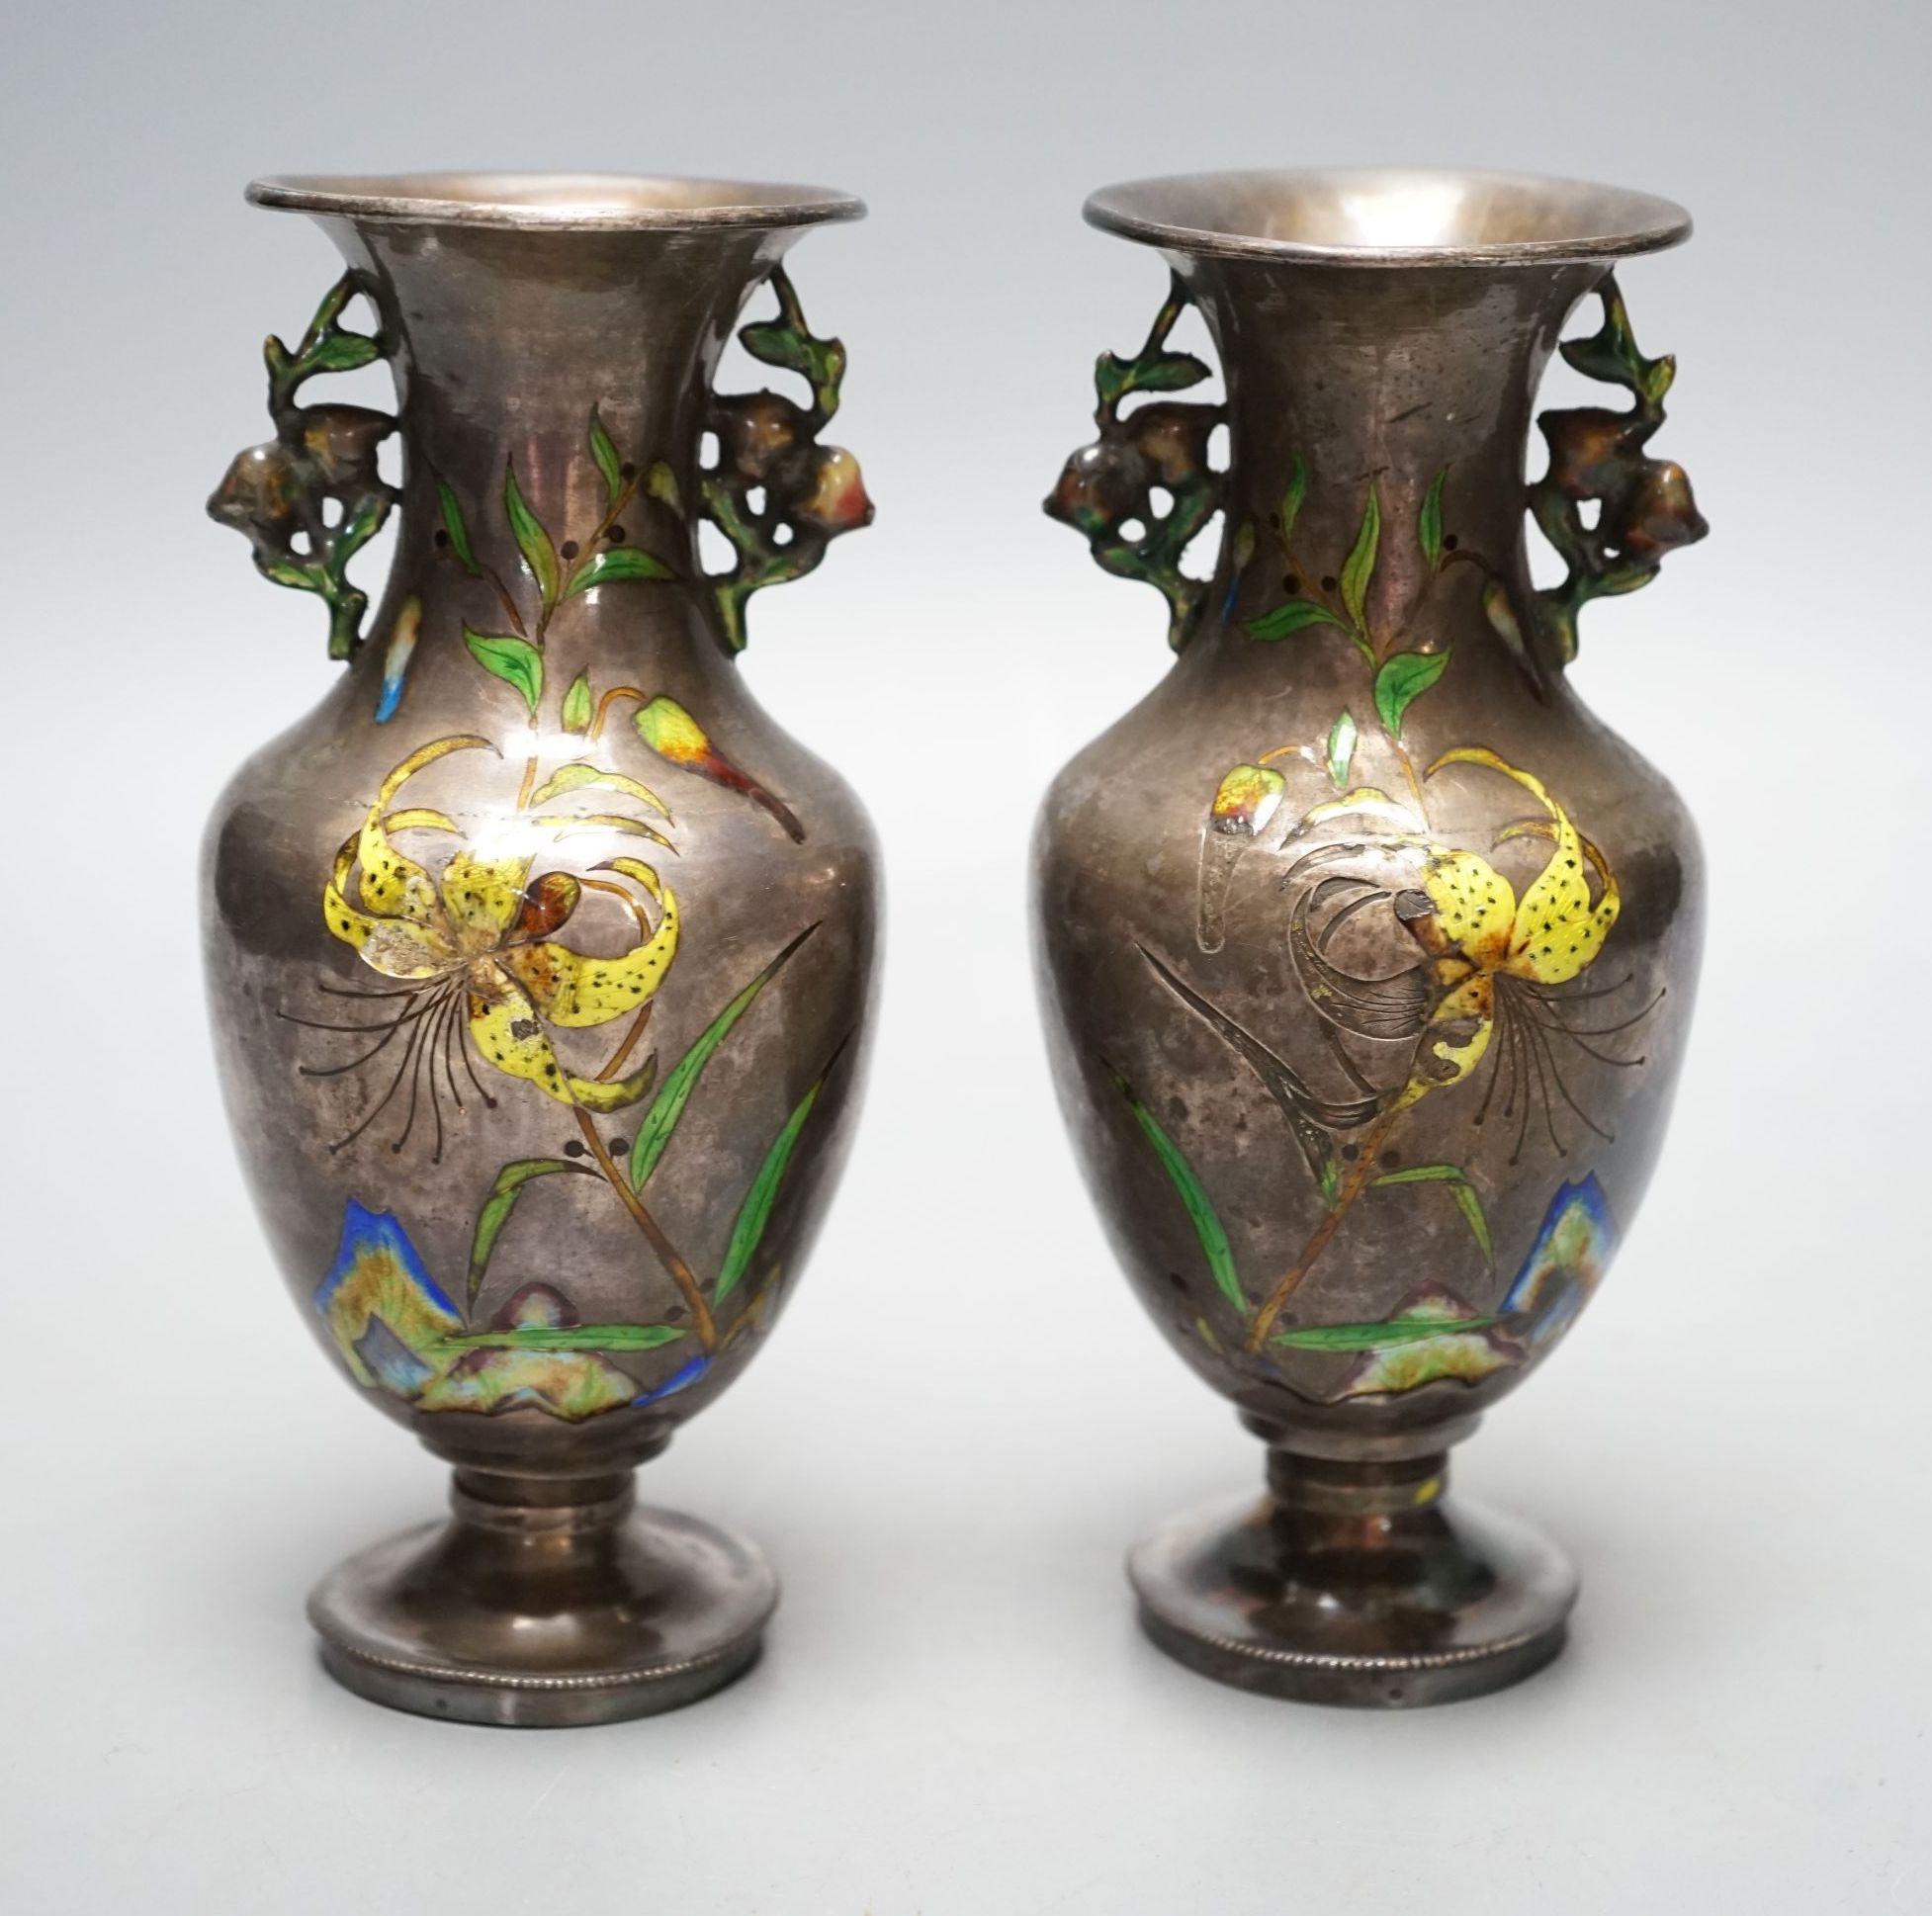 A pair of nice quality Chinese silver and enamel vases, late 19th century, 15 cms high.